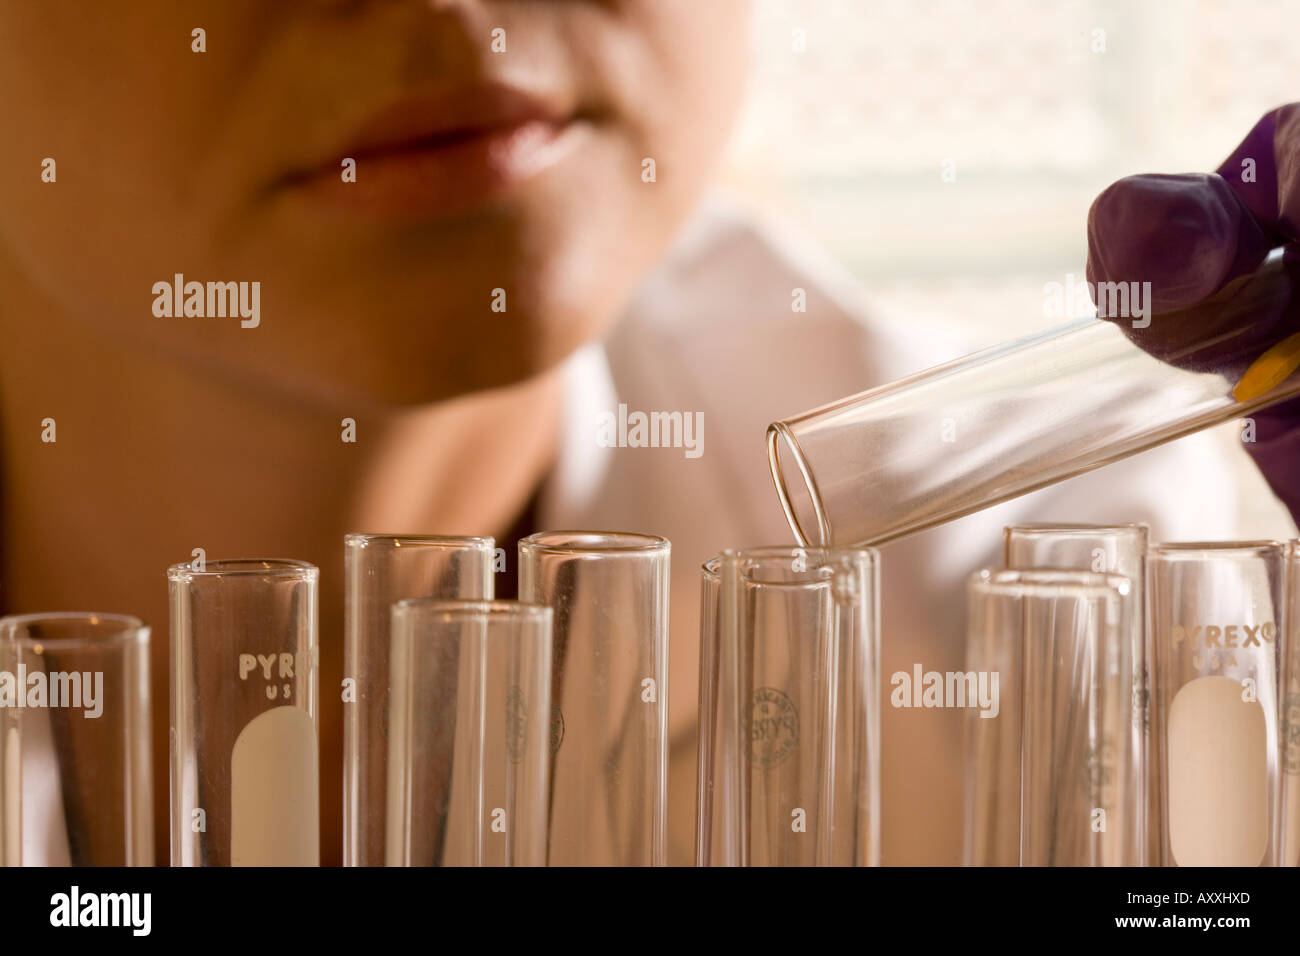 Researcher trying to discover a cure or save the environment. Stock Photo